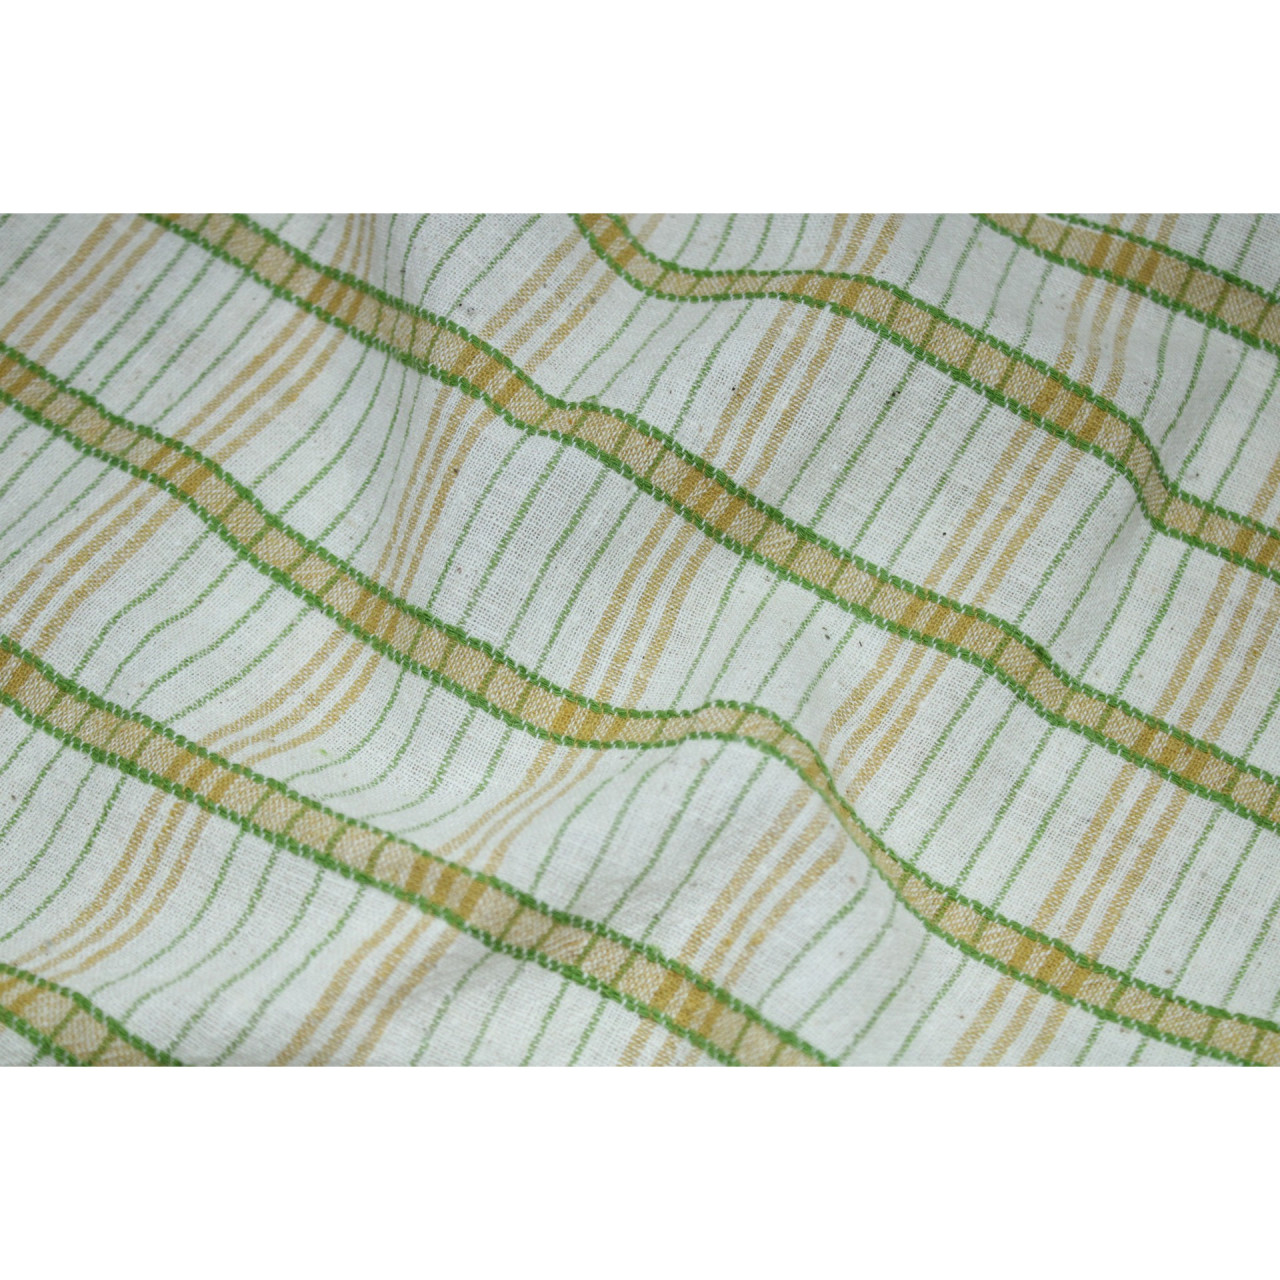 (2124) Kala cotton Azo-free dyed Kutchy yardage from Kutch with extra-weft - Green, yellow, white, stripes, textured